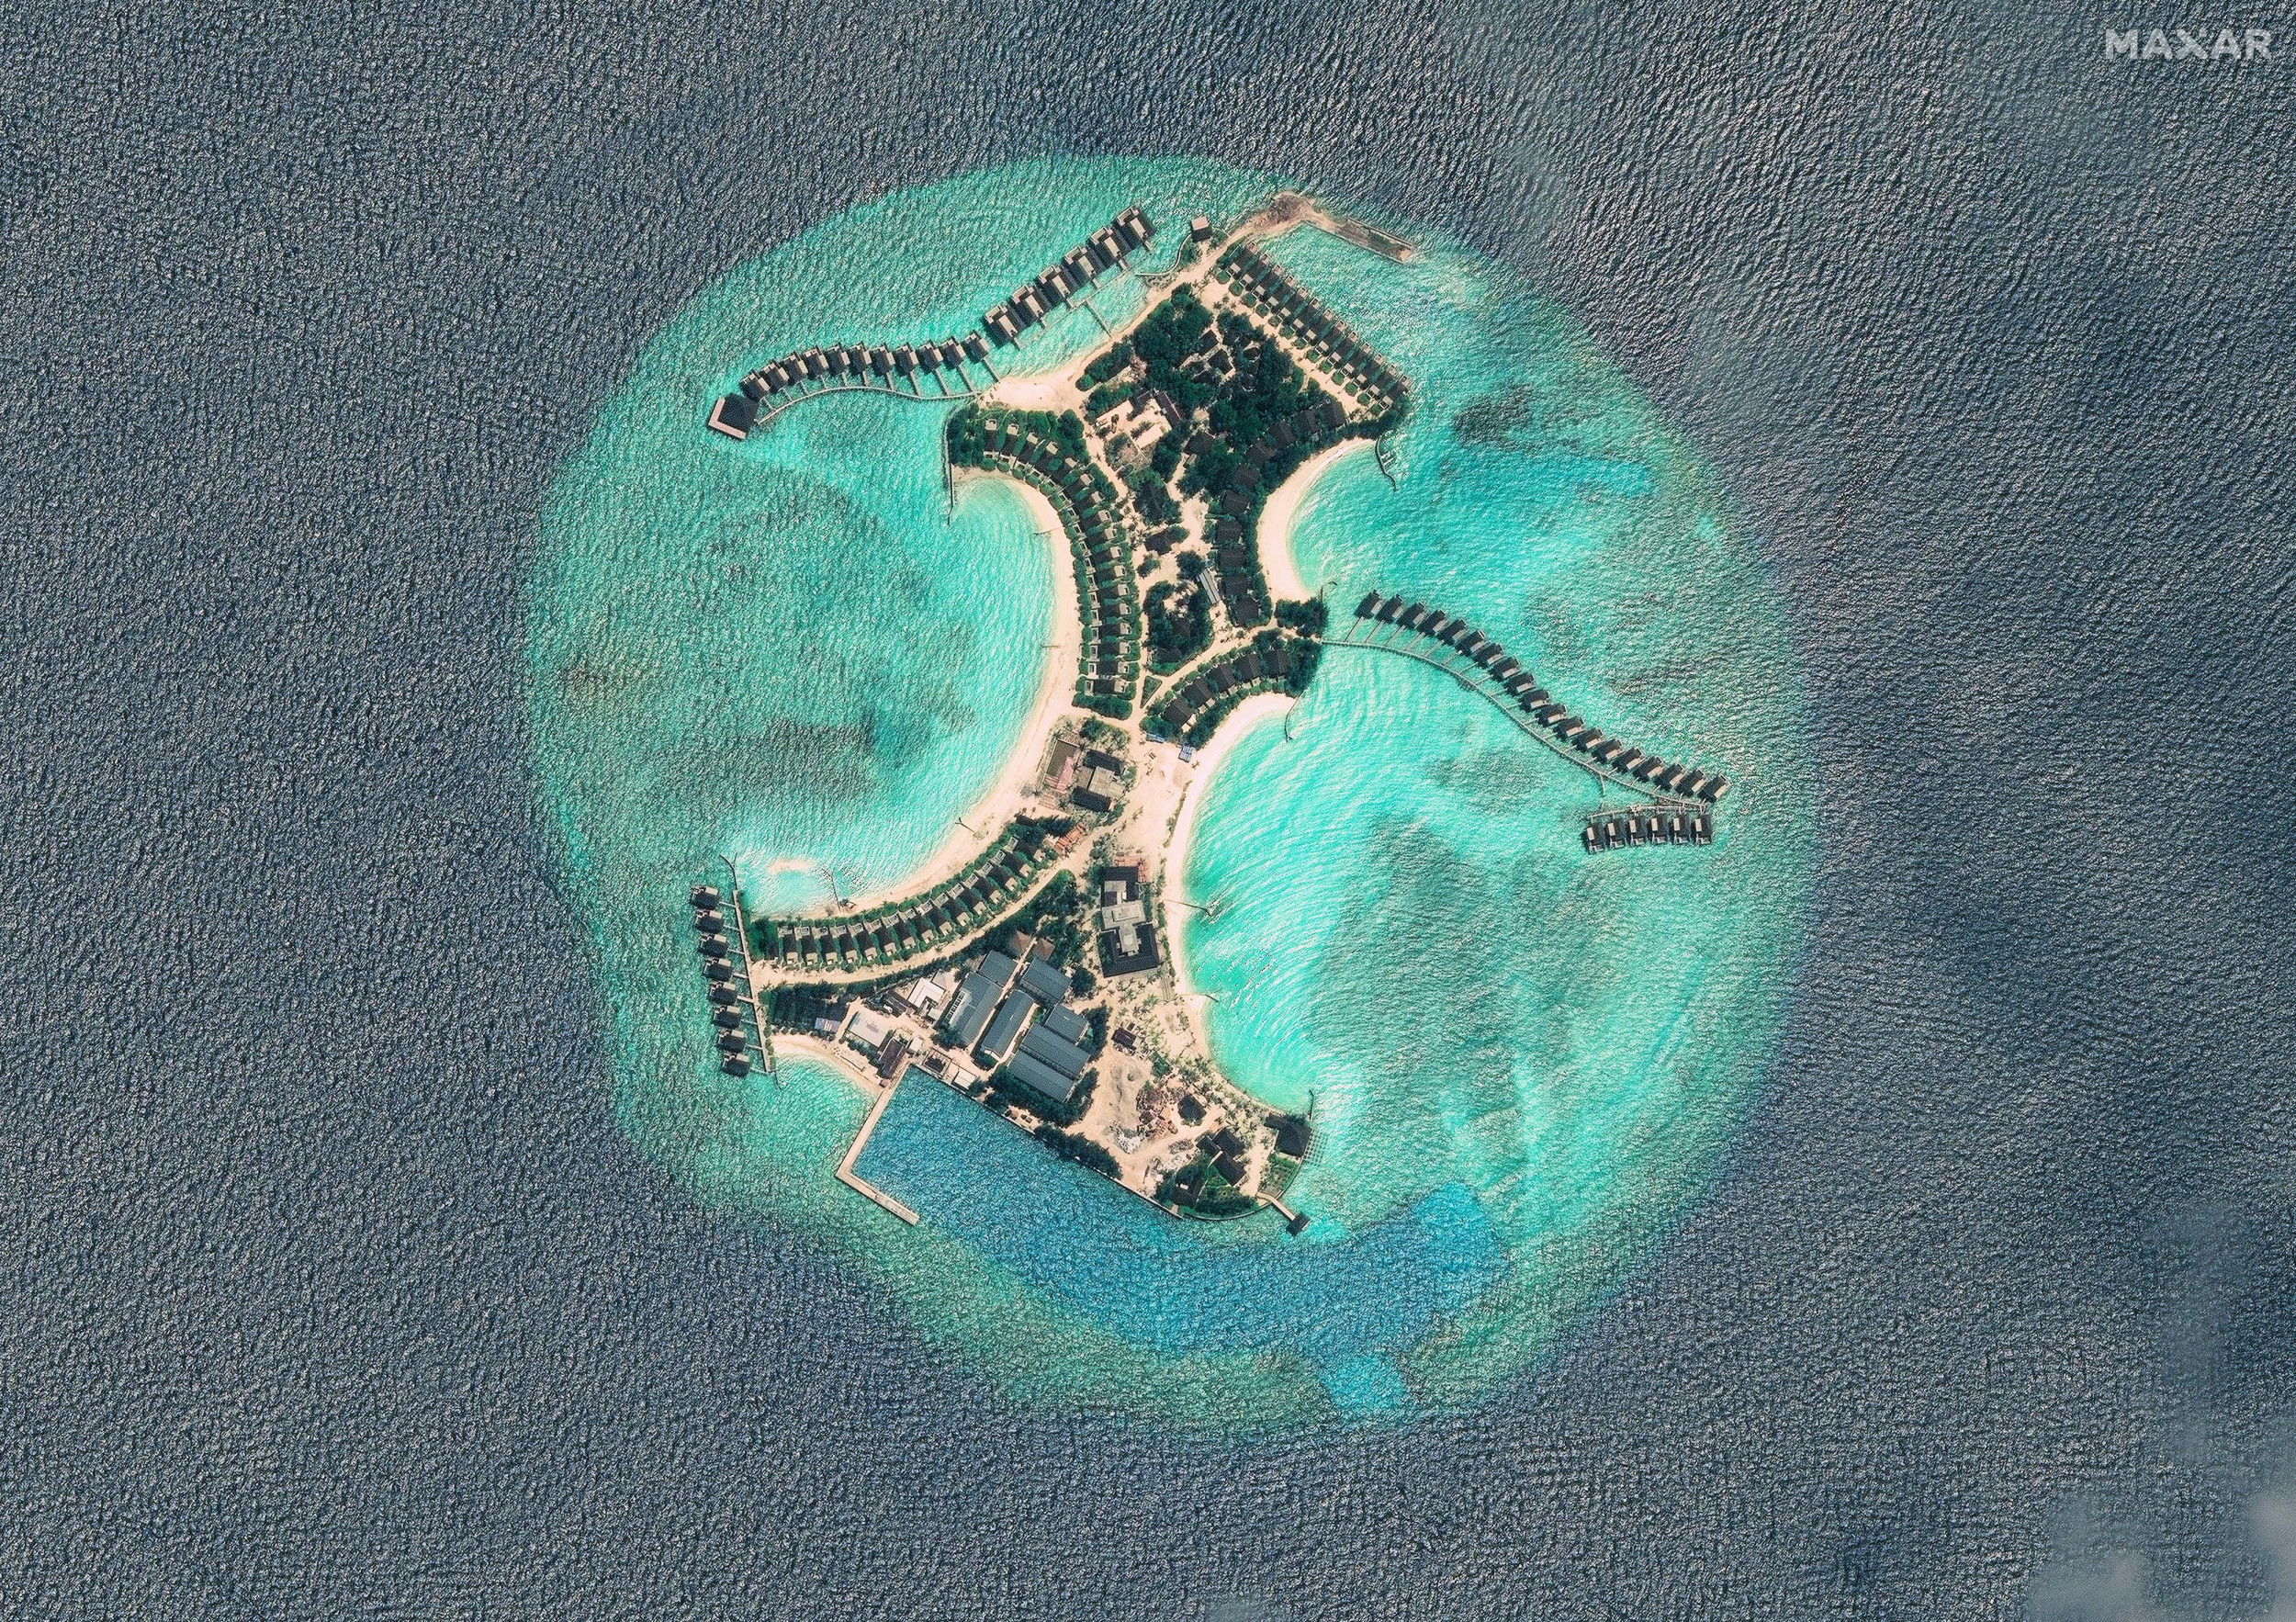 Satellite image shows construction of world’s first floating city